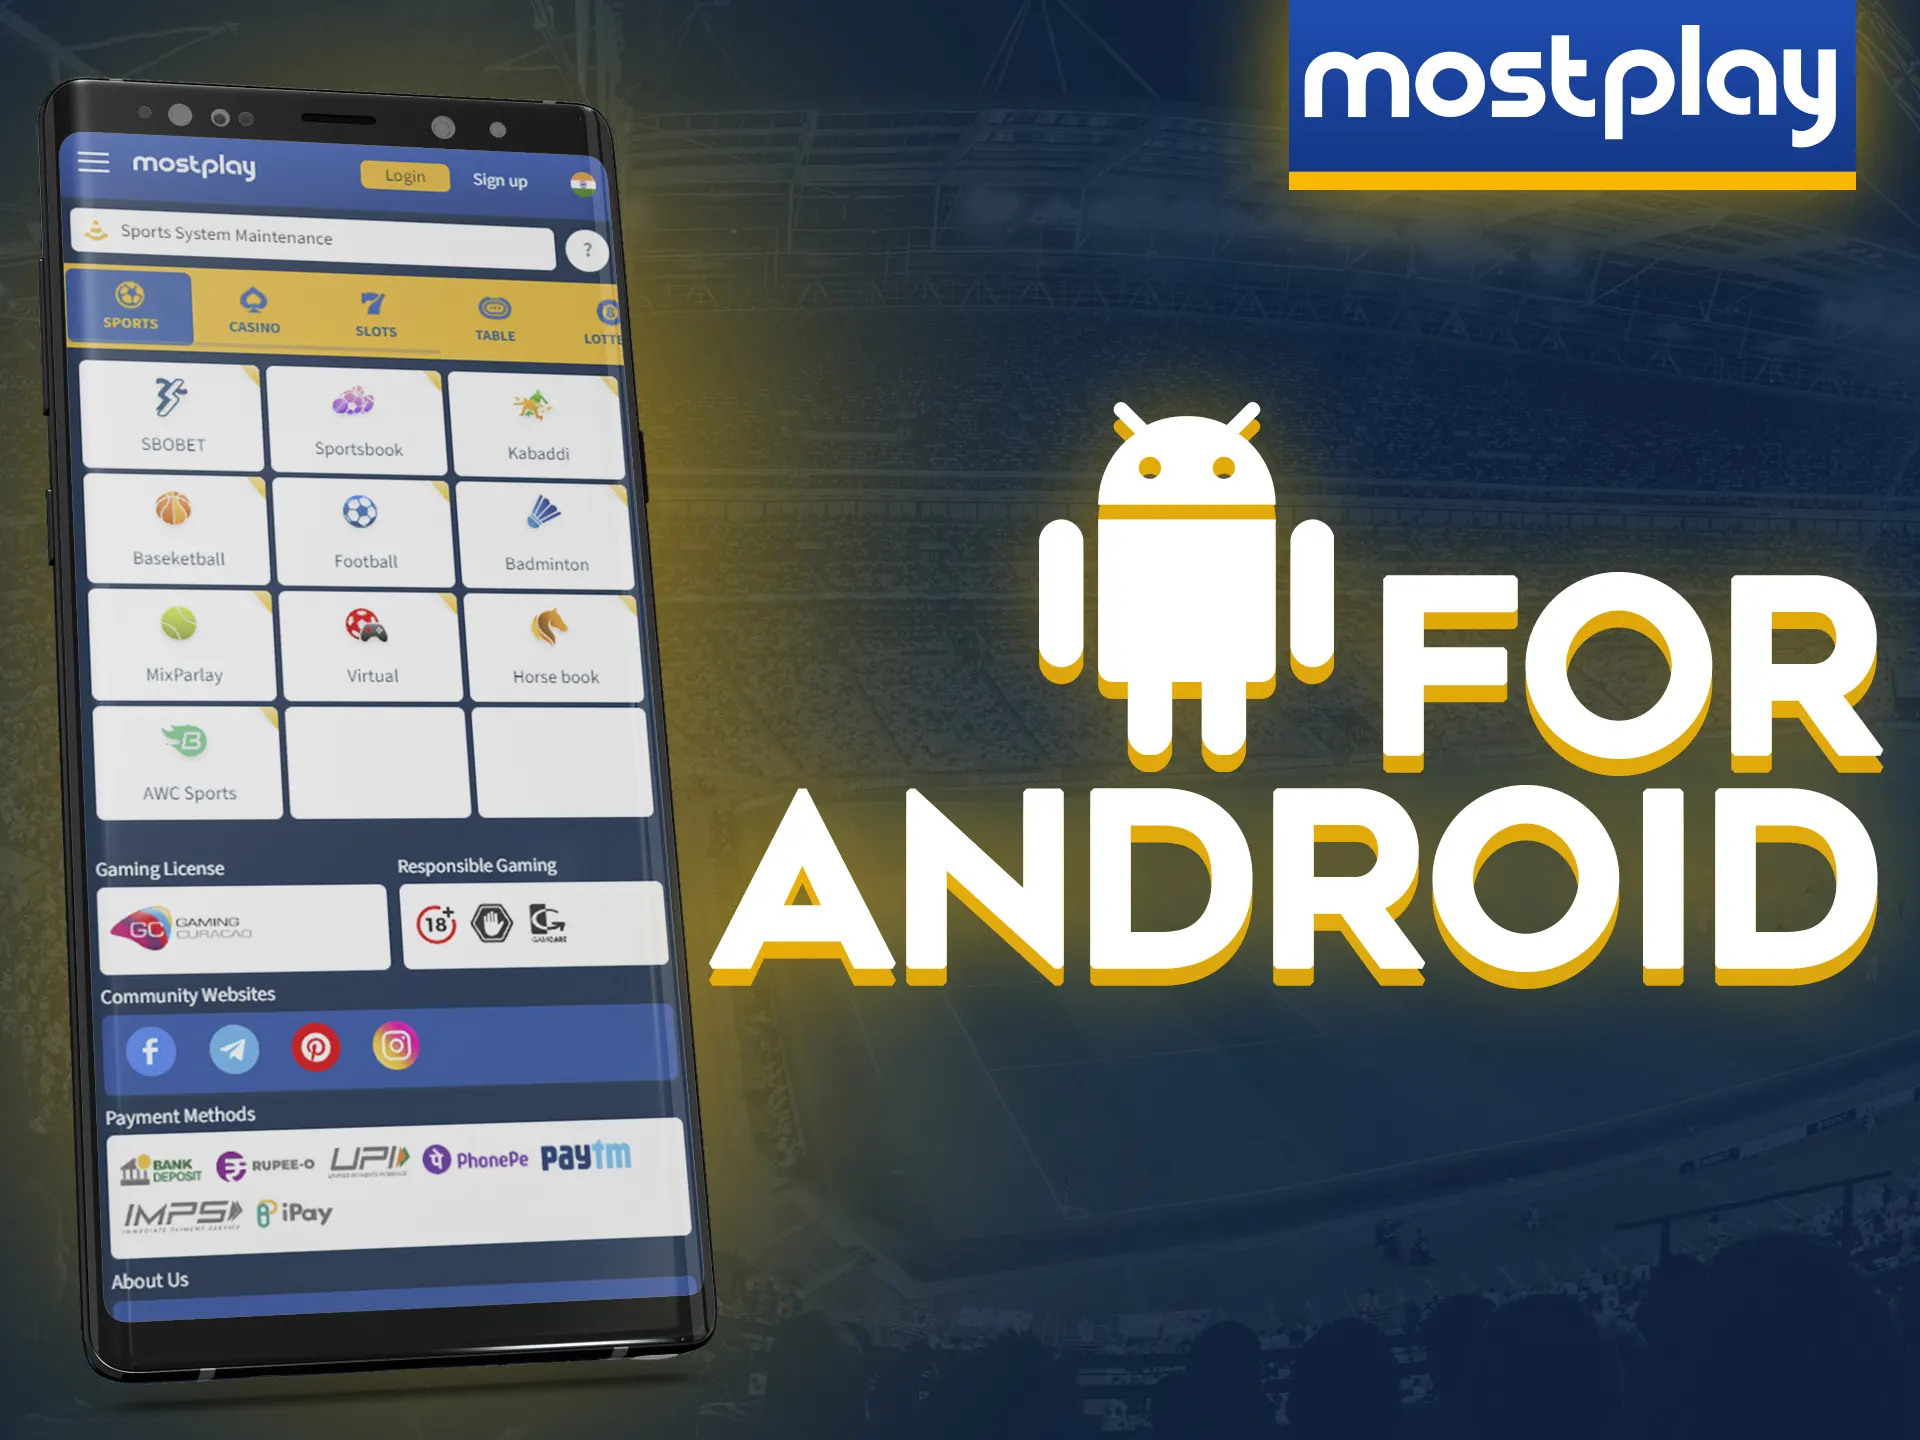 Use the Mostplay app on your Android mobile device.